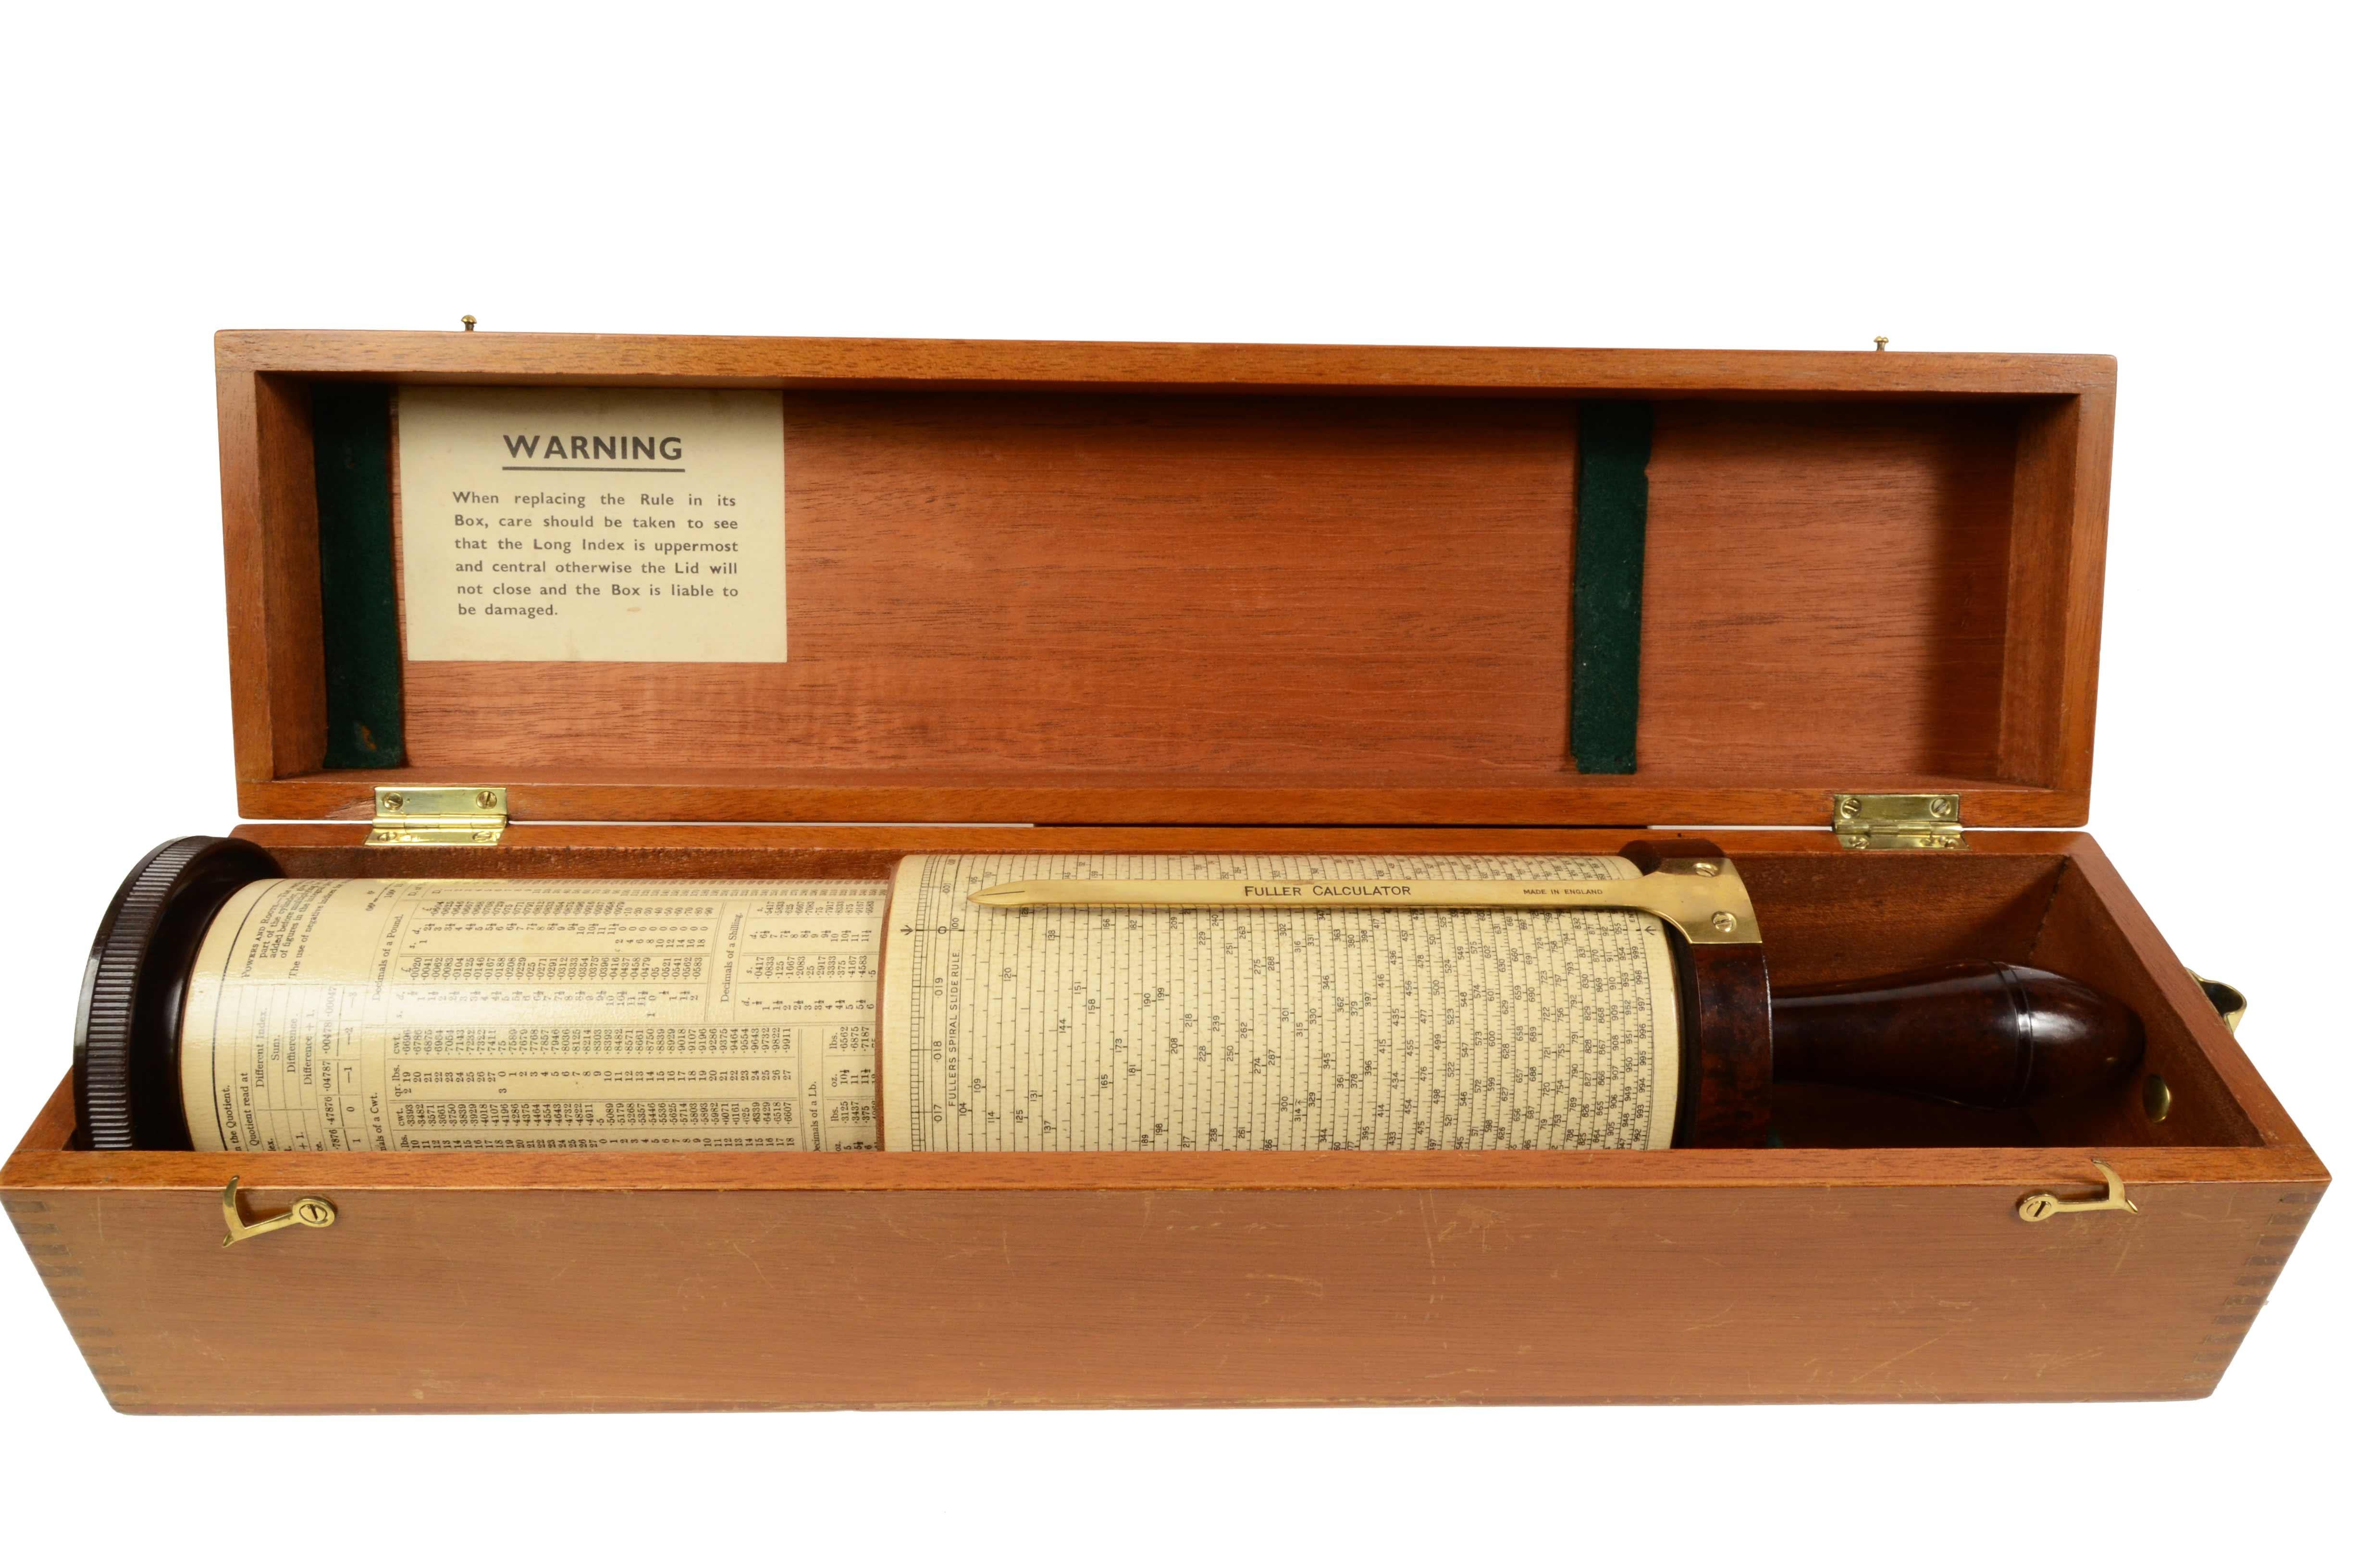 Antique ebonite brass and papier maché spiral slide-rule, conceived by George Fuller from Belfast, engineering professor in Queen’s University in London in 1878, made by STANLEY in the early 1920s; it is located in its original mahogany box. Very